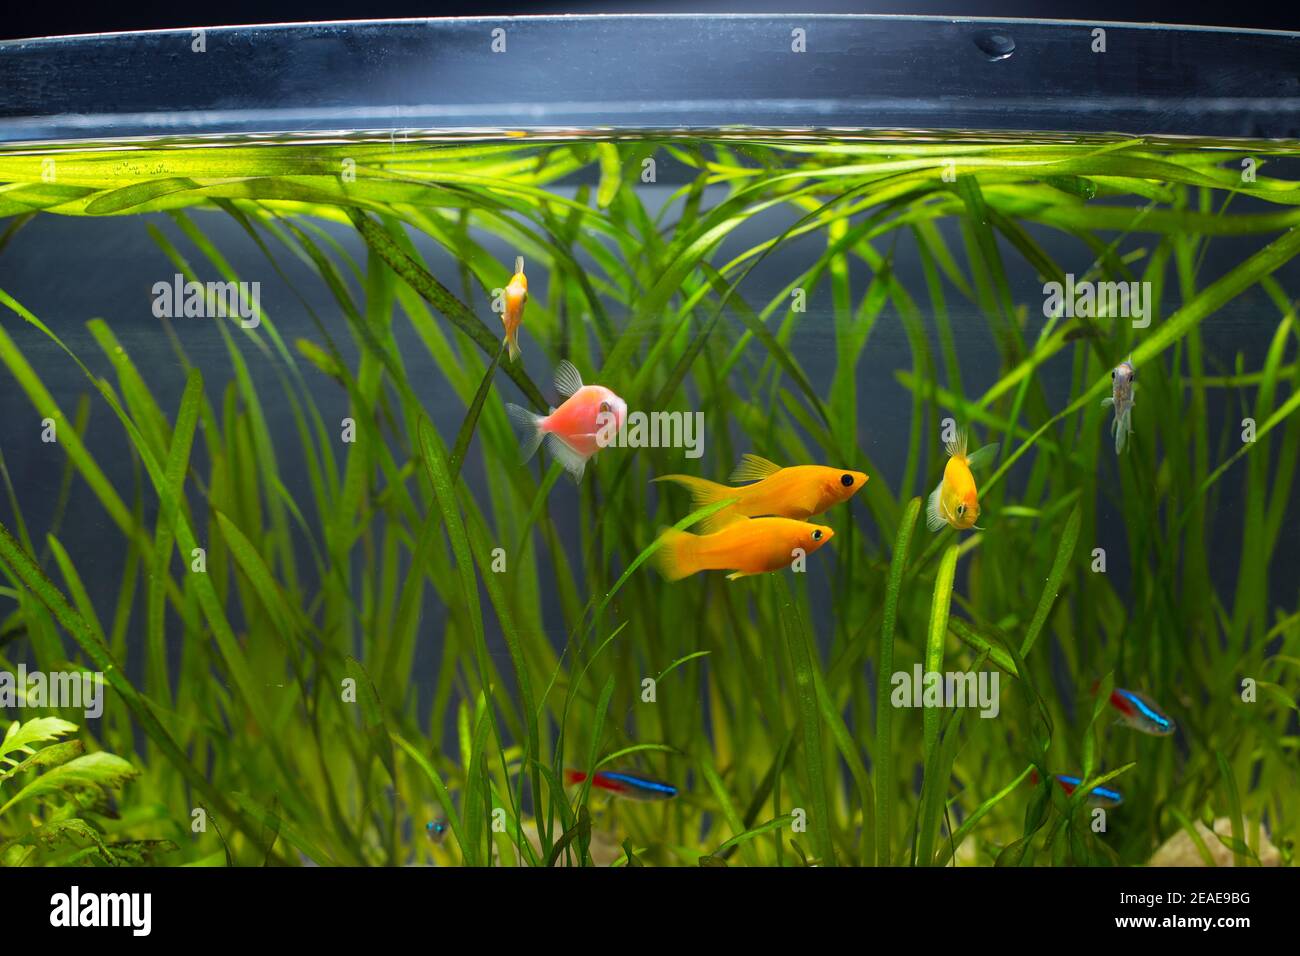 Home pets, aquarium fish different colors with plants in tank. Stock Photo